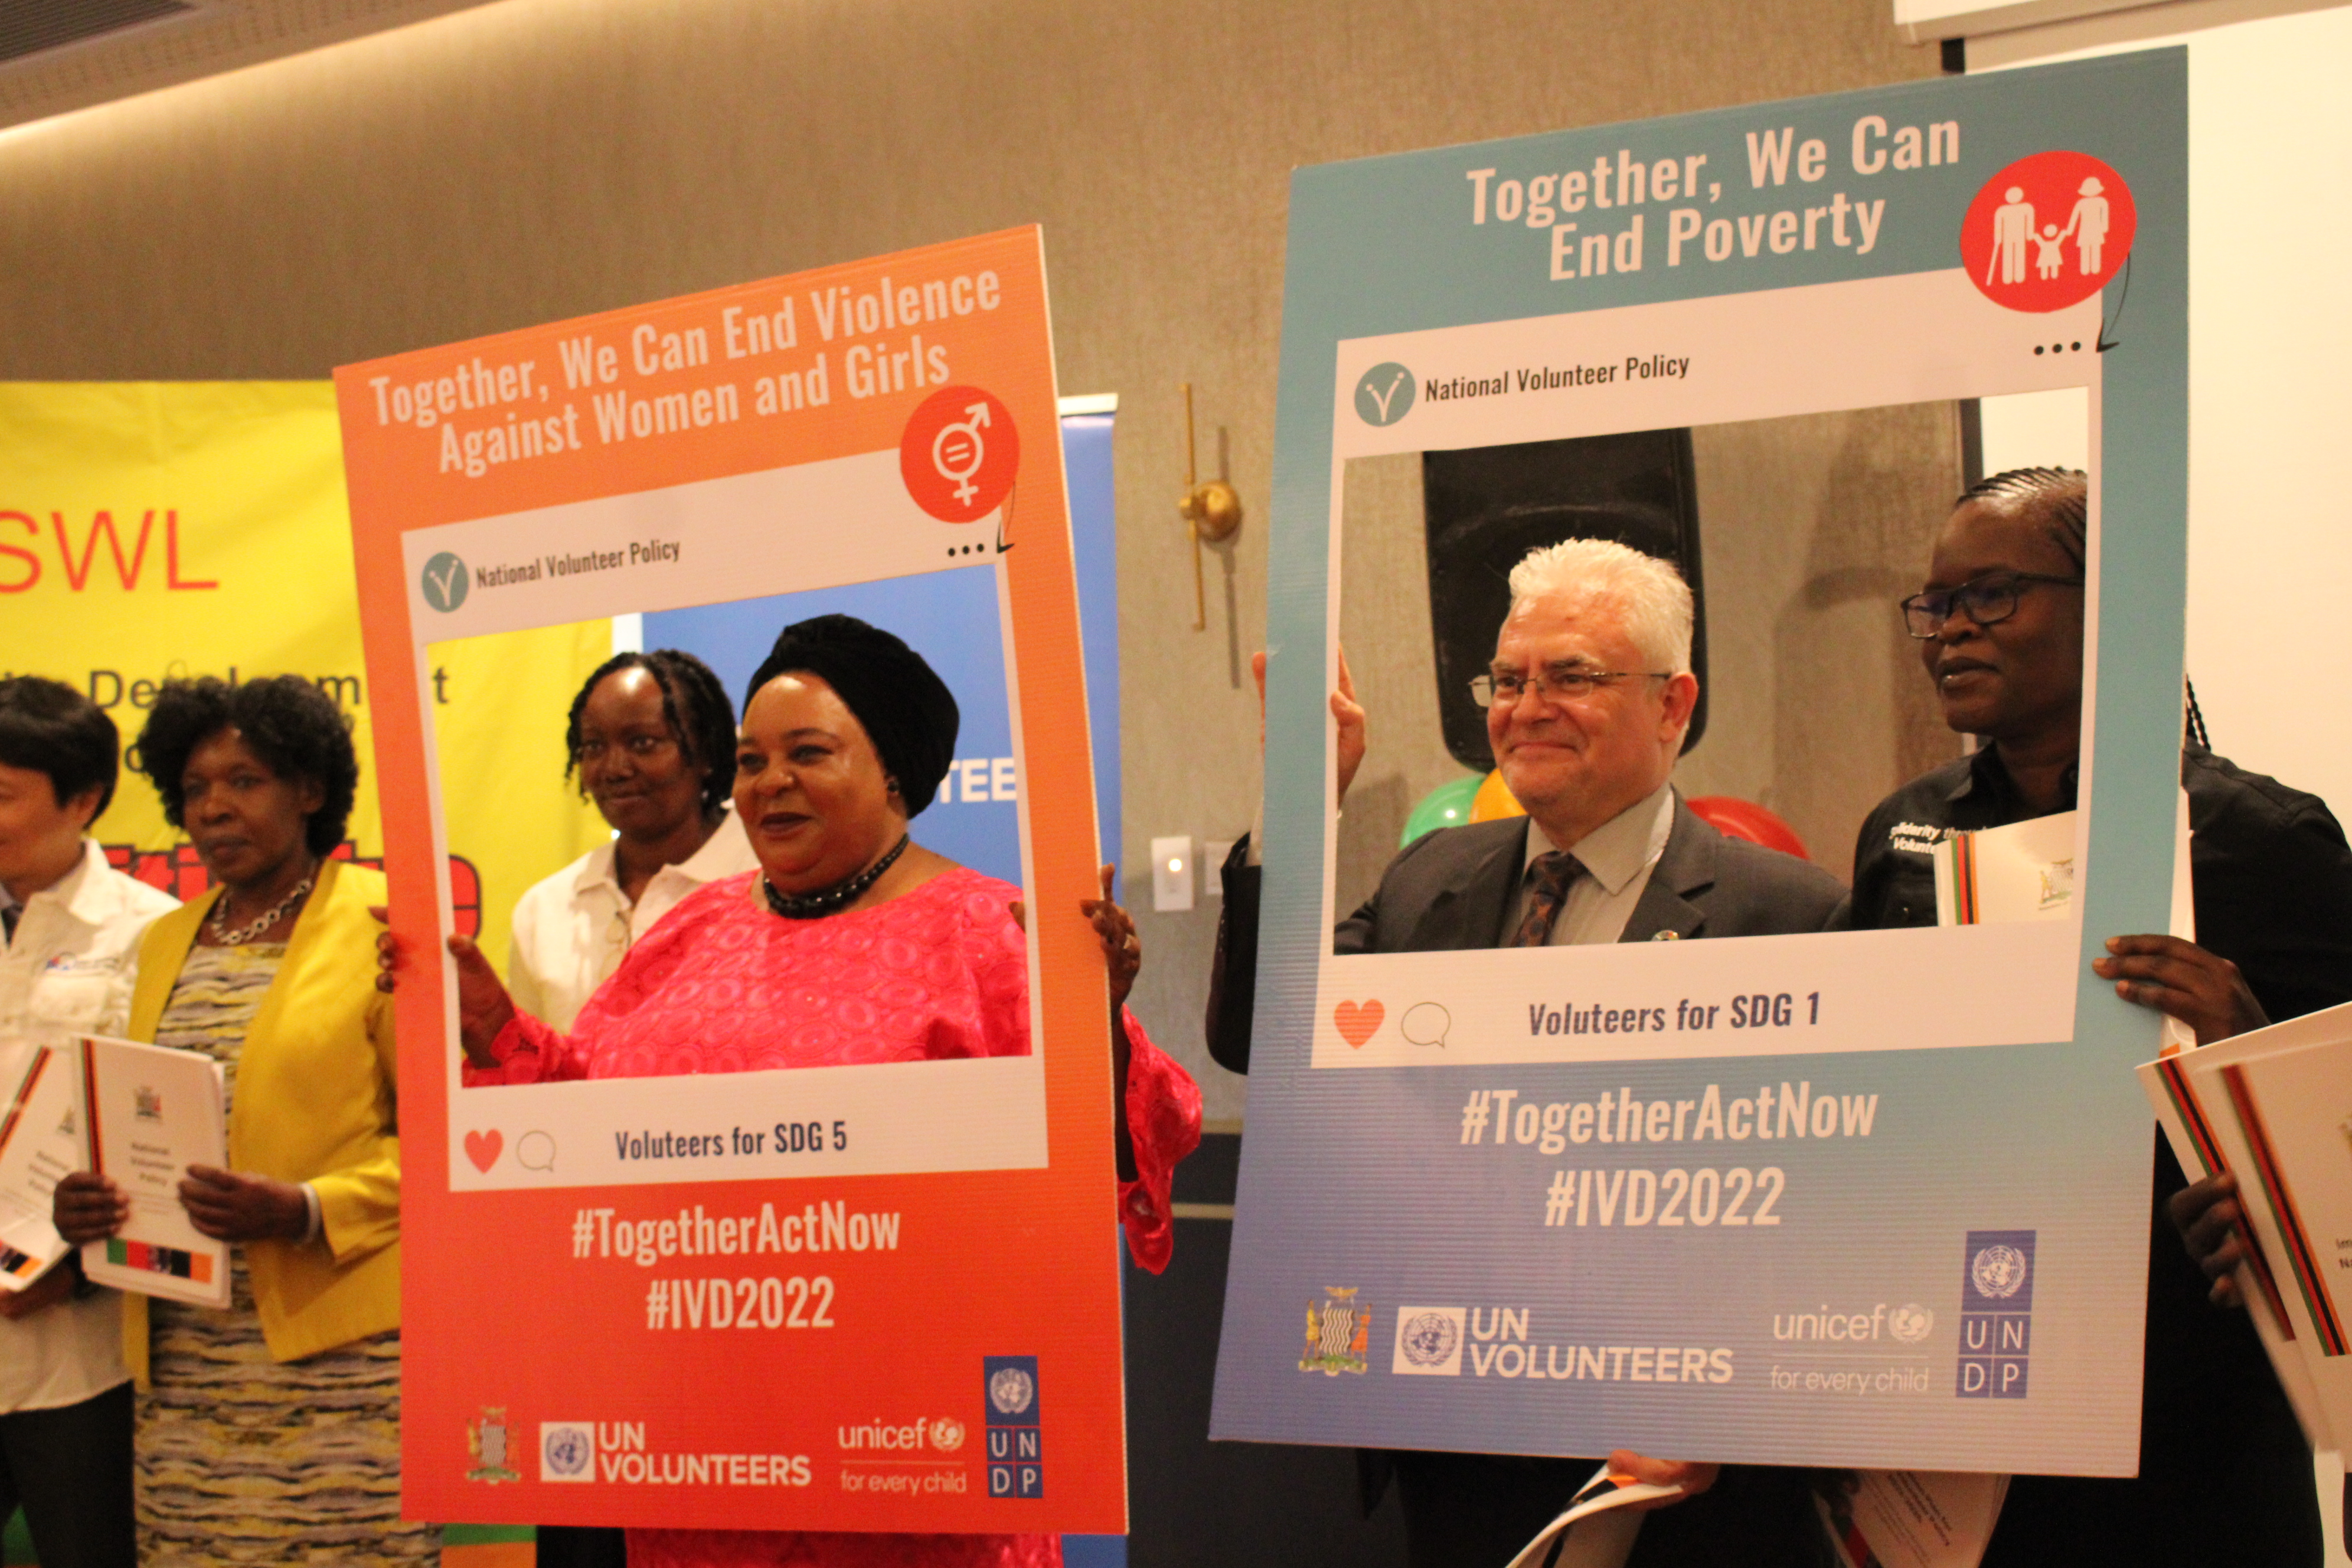 Zambia's Honourable Minister of Community Development and Social Services, Ms.  Doreen Sefuke Mwamba, MP and the UNDP Resident Representative, Lionel Laurens, and the UN Resident Coordinator, Beatrice Mutali, at the launch of Zambia's first National Volunteers Policy